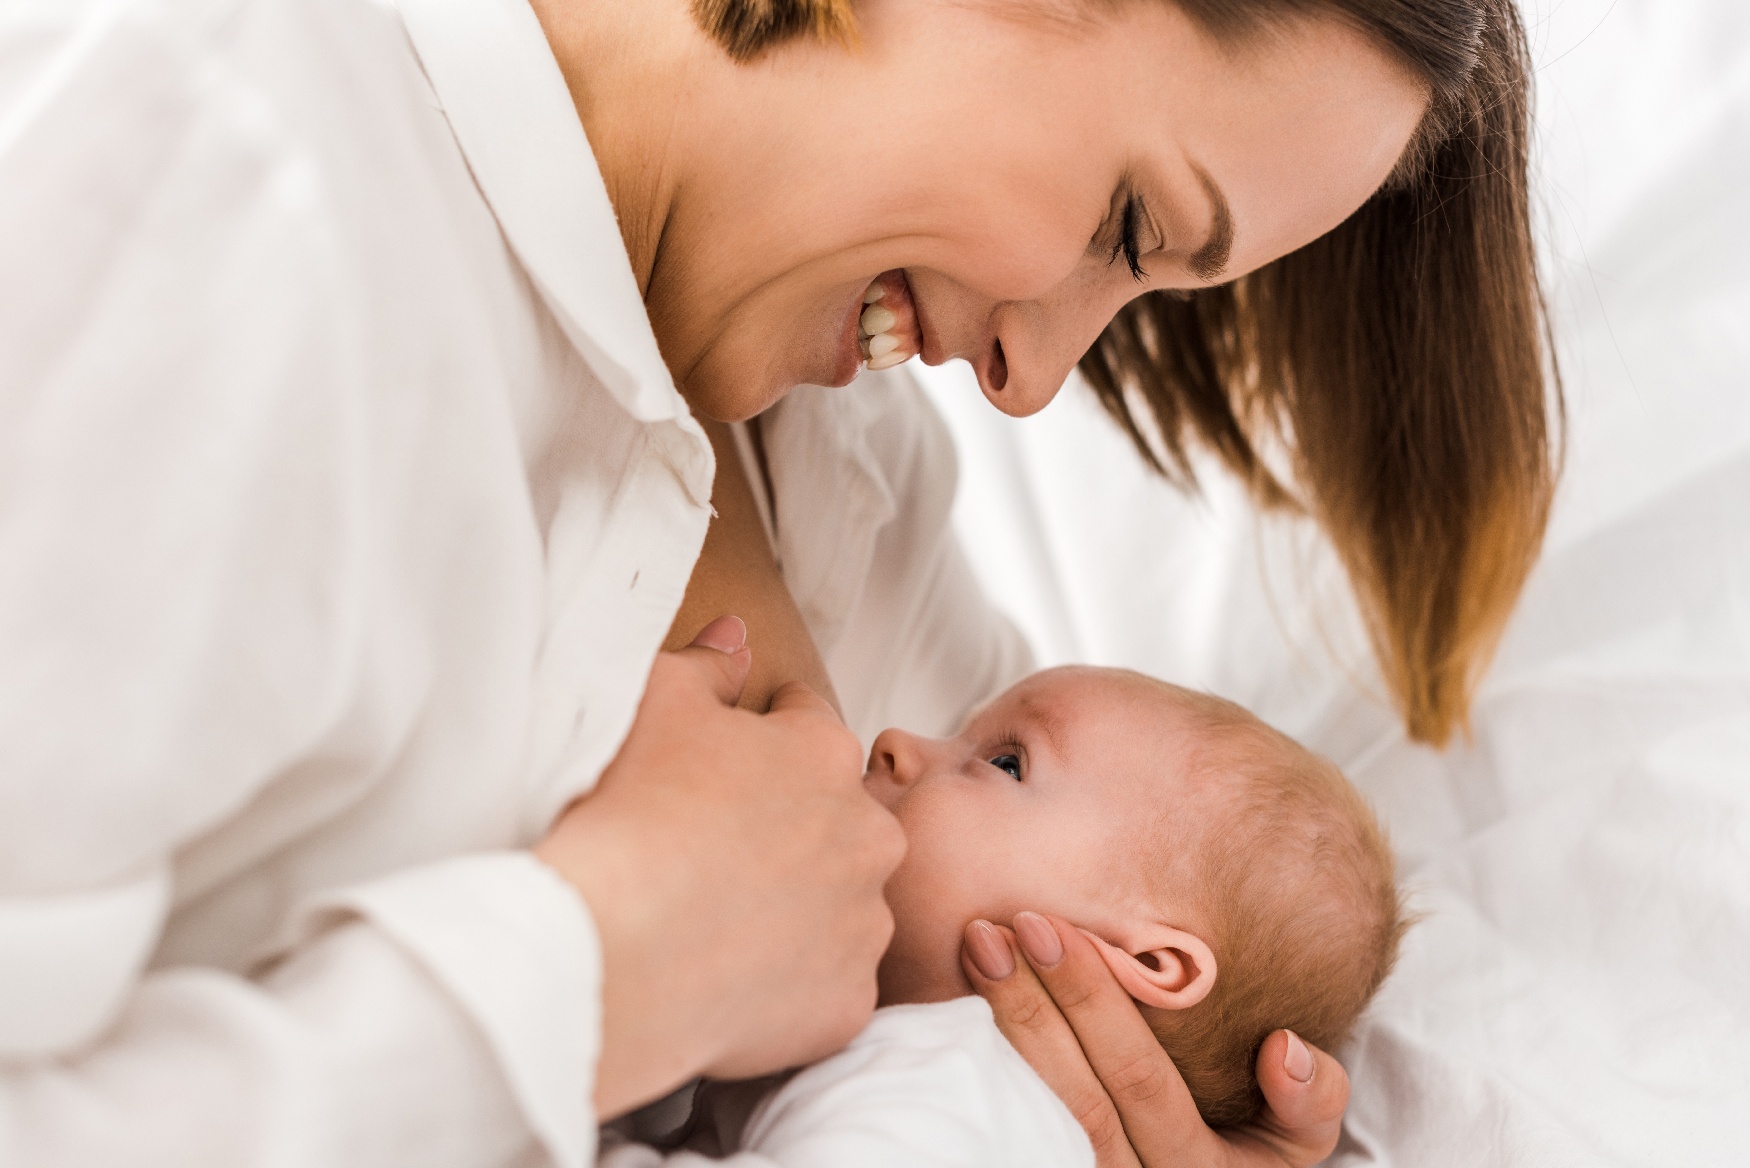 4 Reasons to Breast Feed Your Baby - Exploring the Differences Between Formula Feeding and Breastfeeding